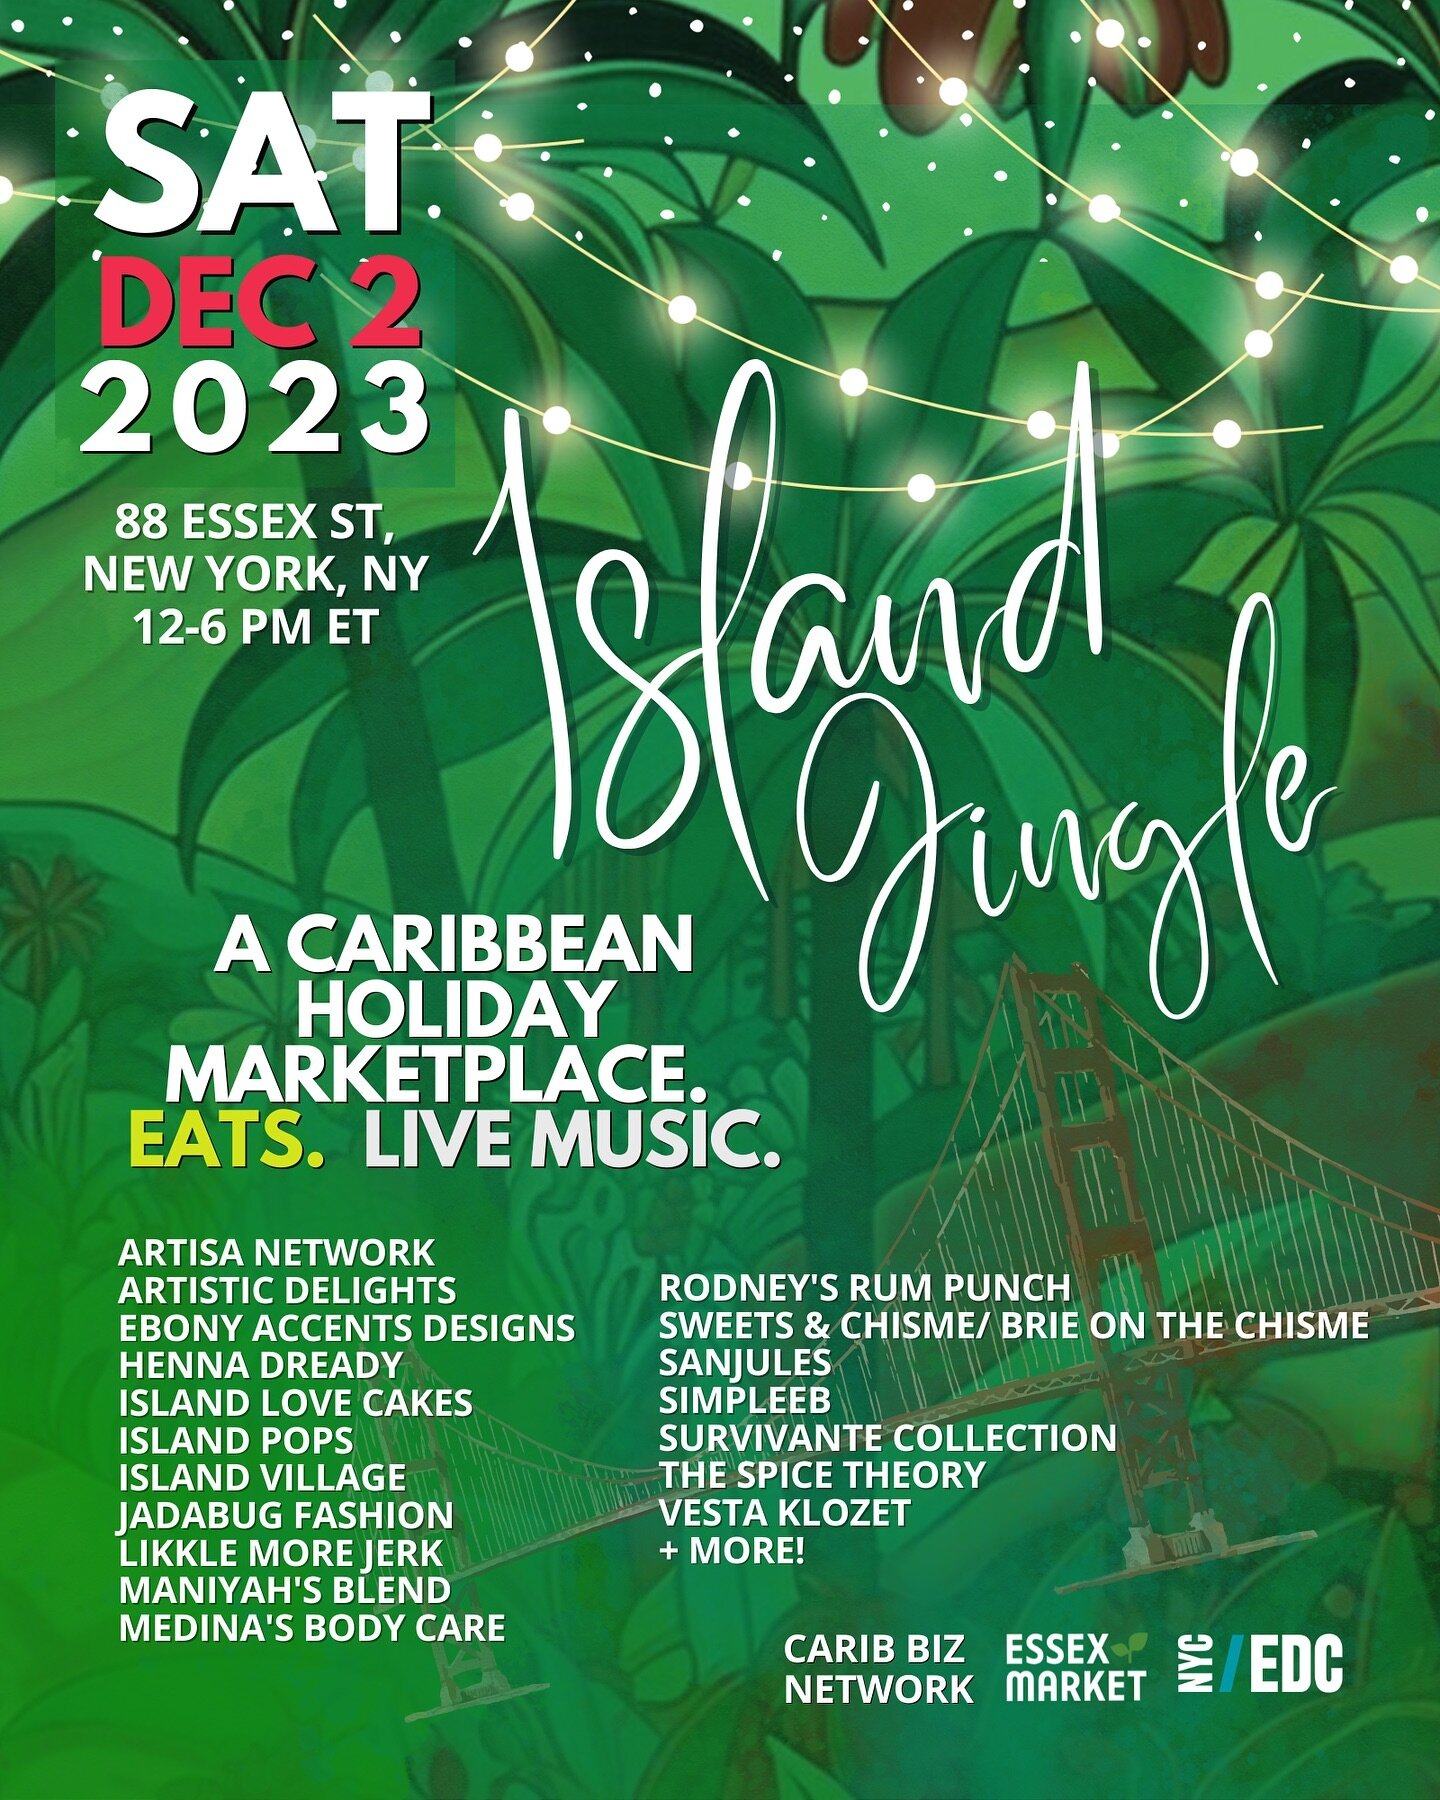 Wi looking forward to seeing wi famalay come out for a day of eats, shopping and live music! 

Island Jingle 2023 is back with all the festive Caribbean vibes. 

Date: Sat, 2nd Dec 2023
Time: 12-6 PM
Where: @essexmarket 88 Essex St. 
What: Family Fri